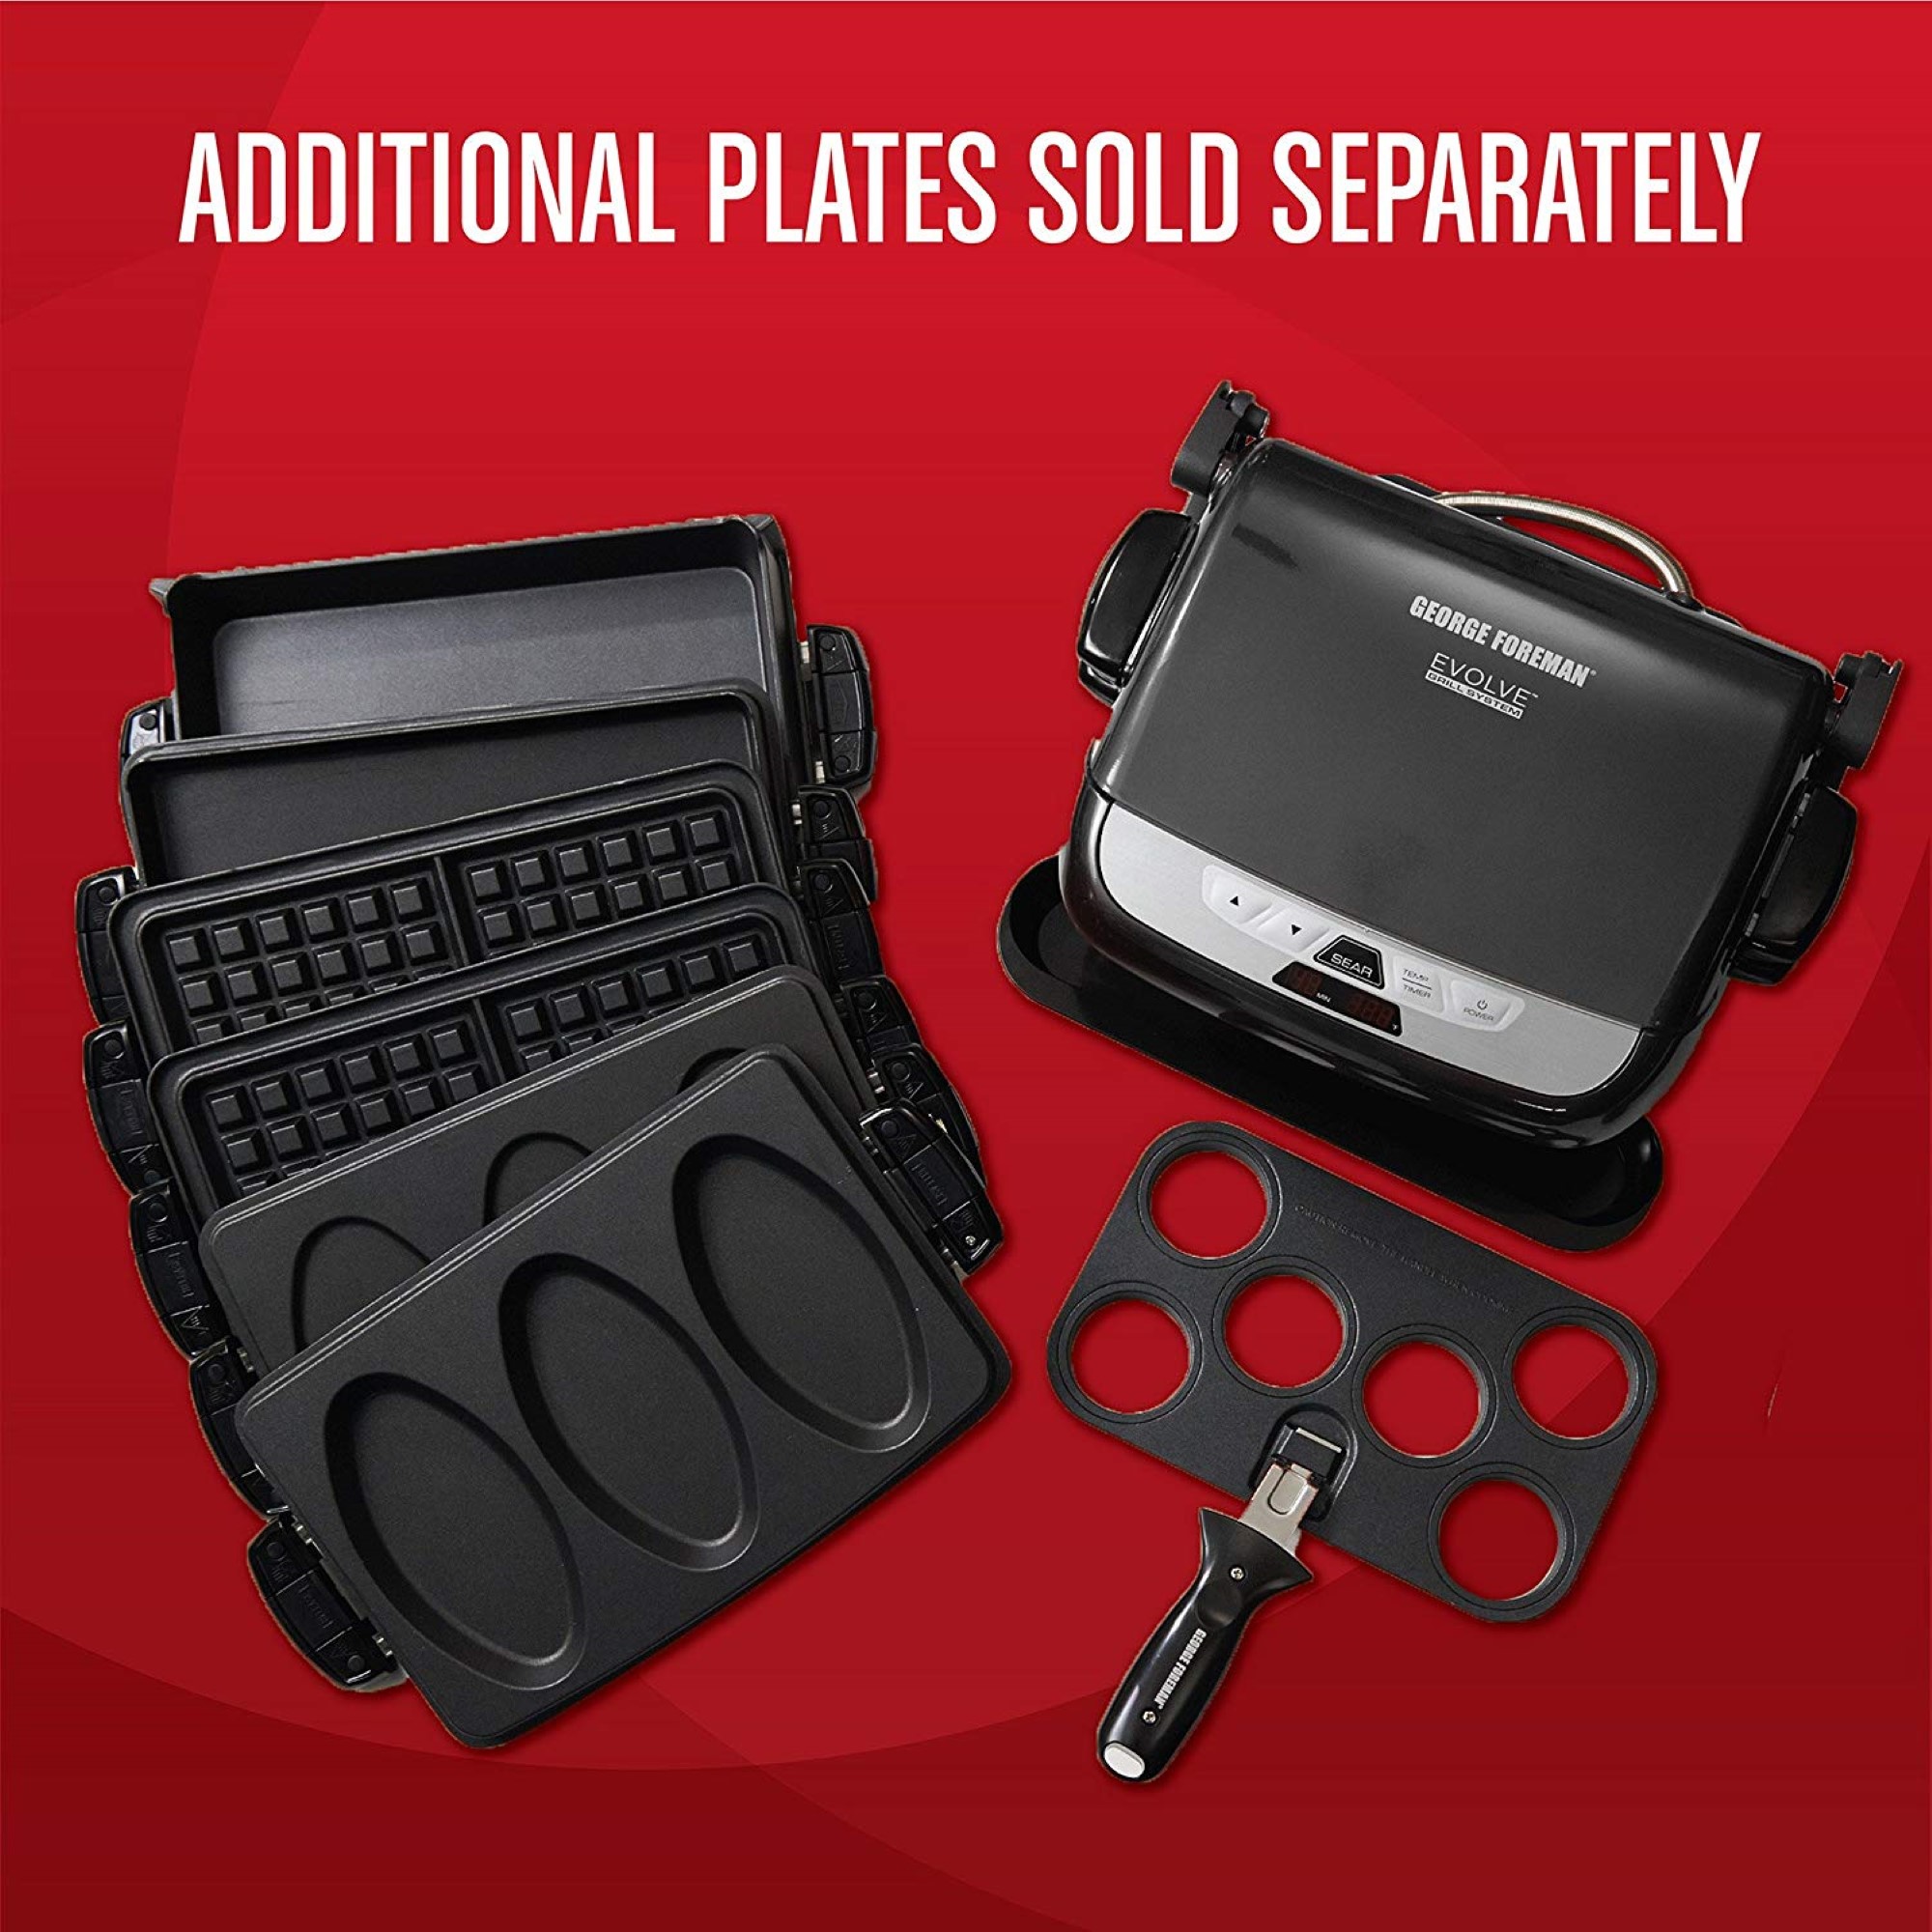 George Foreman 5-Serving Evolve Grill With Waffle Plates And Ceramic Grill Plates Black - image 2 of 5